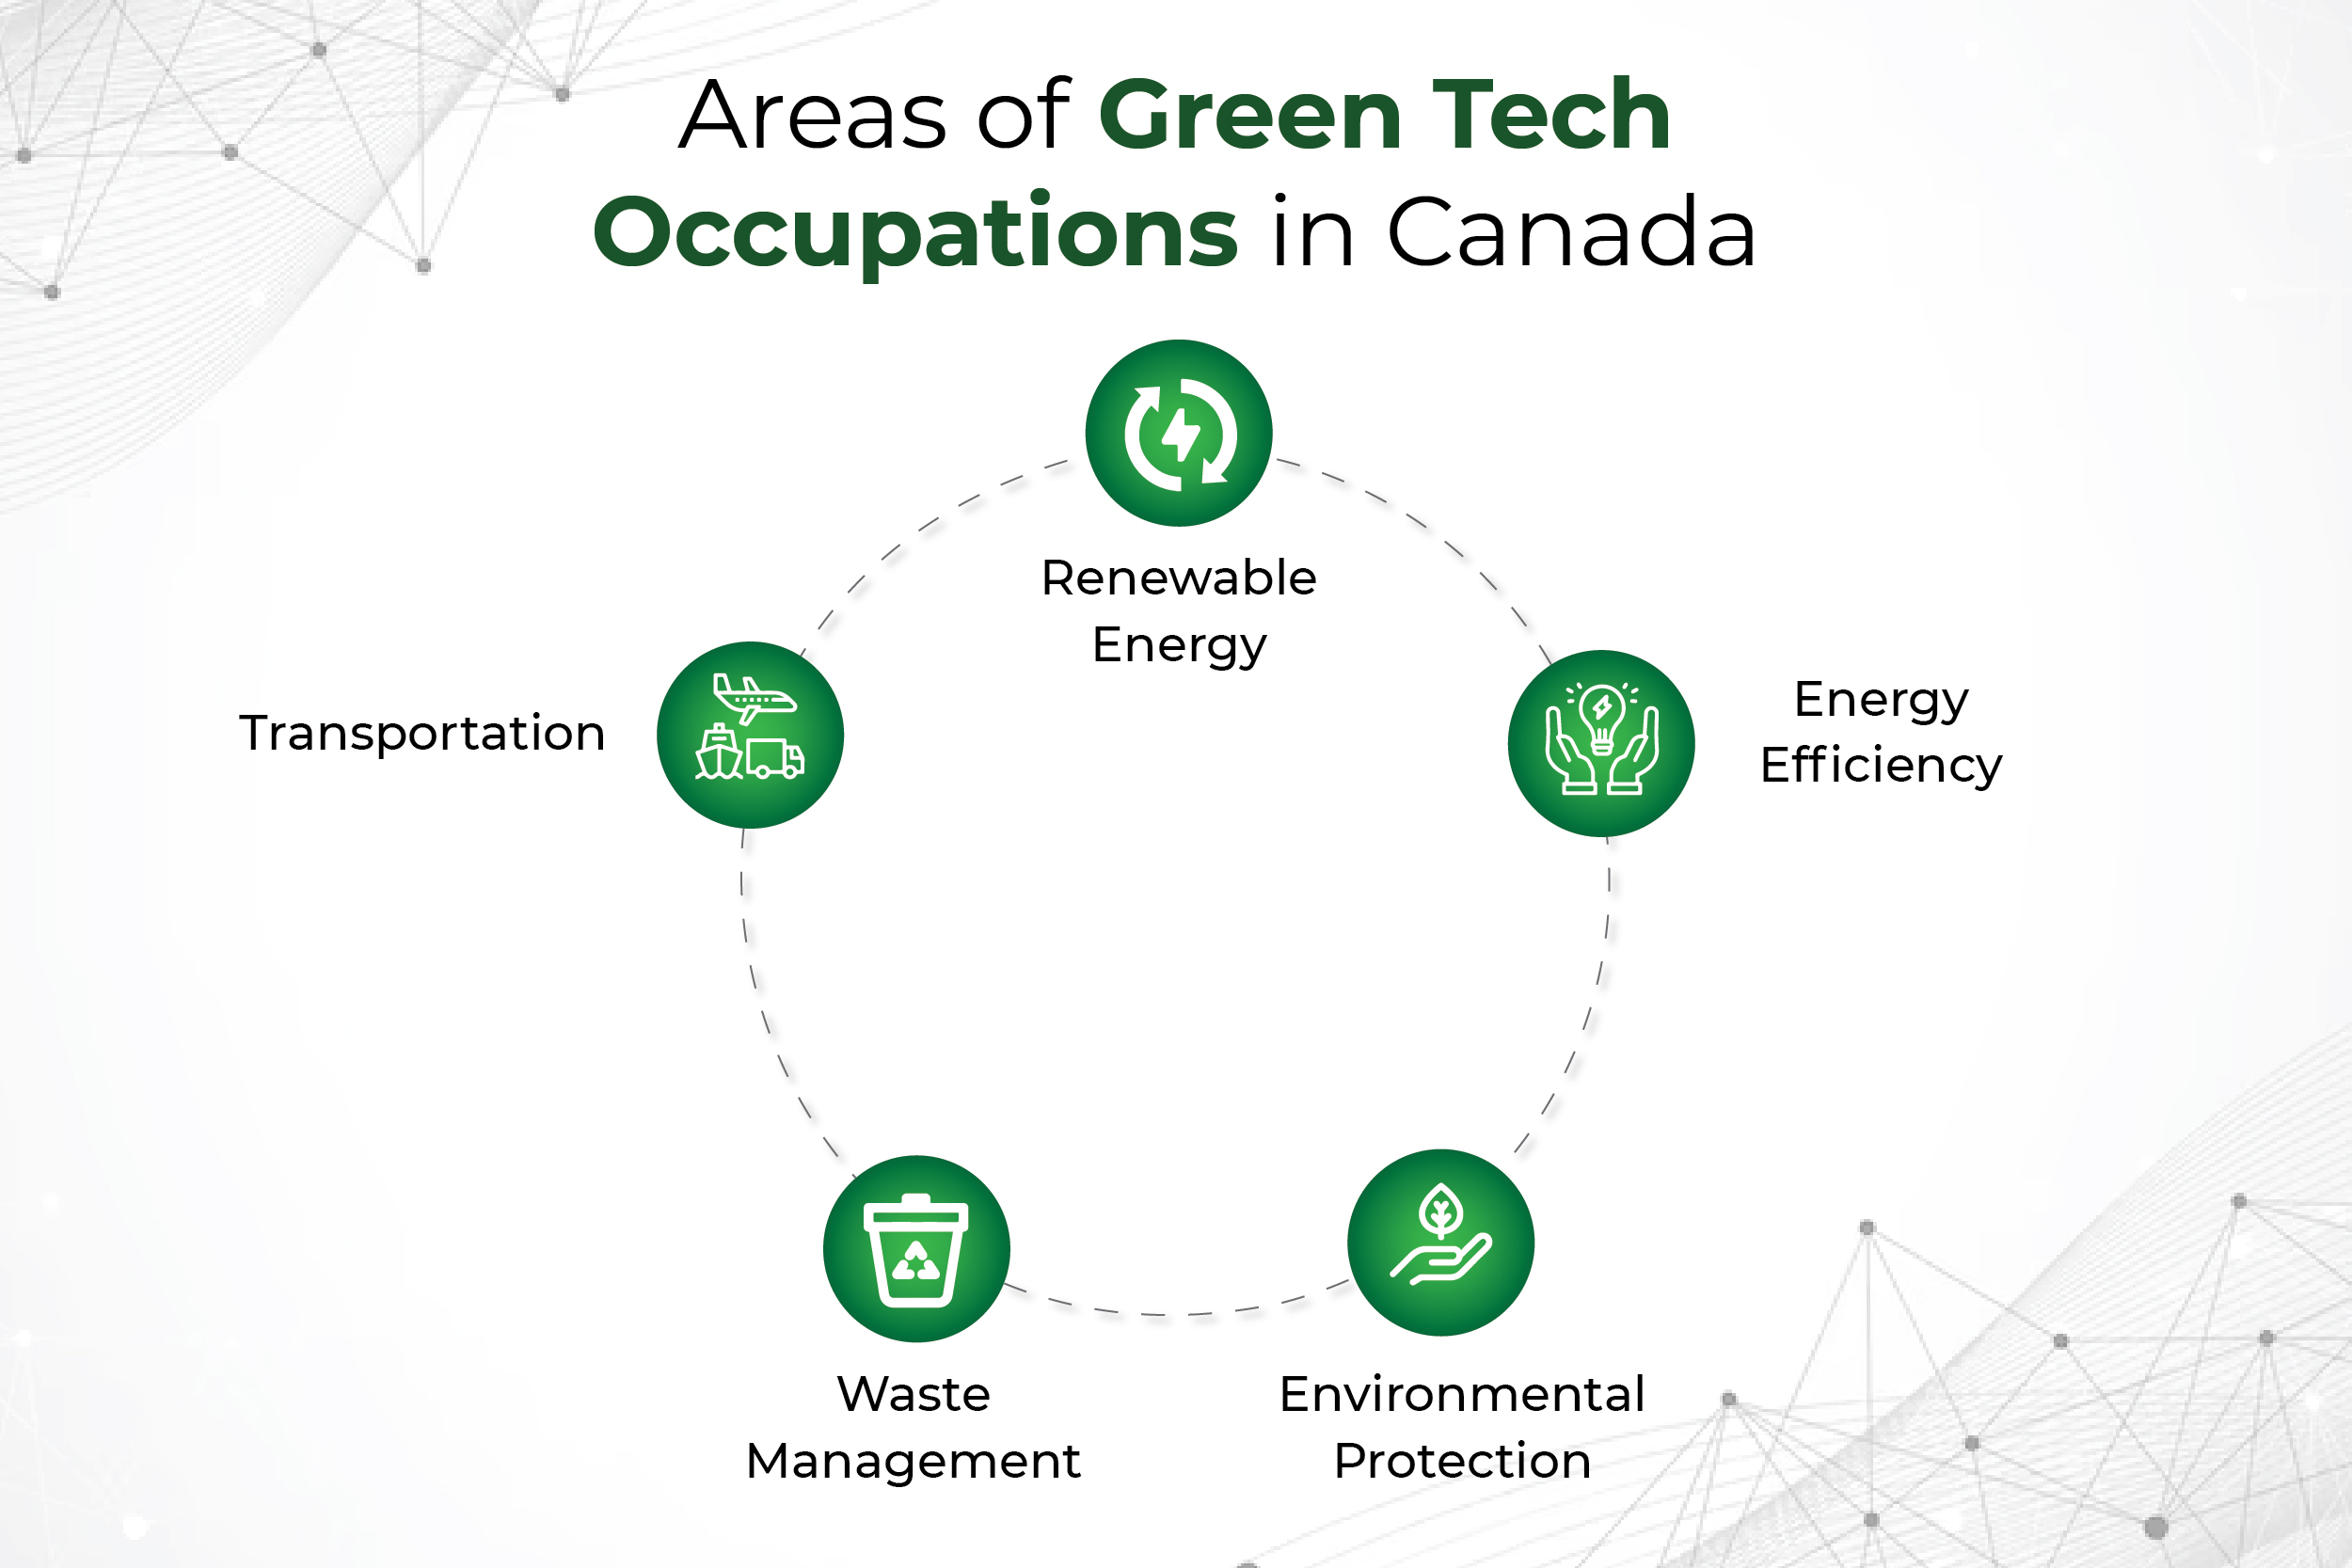 Green Tech Occupations in Canada